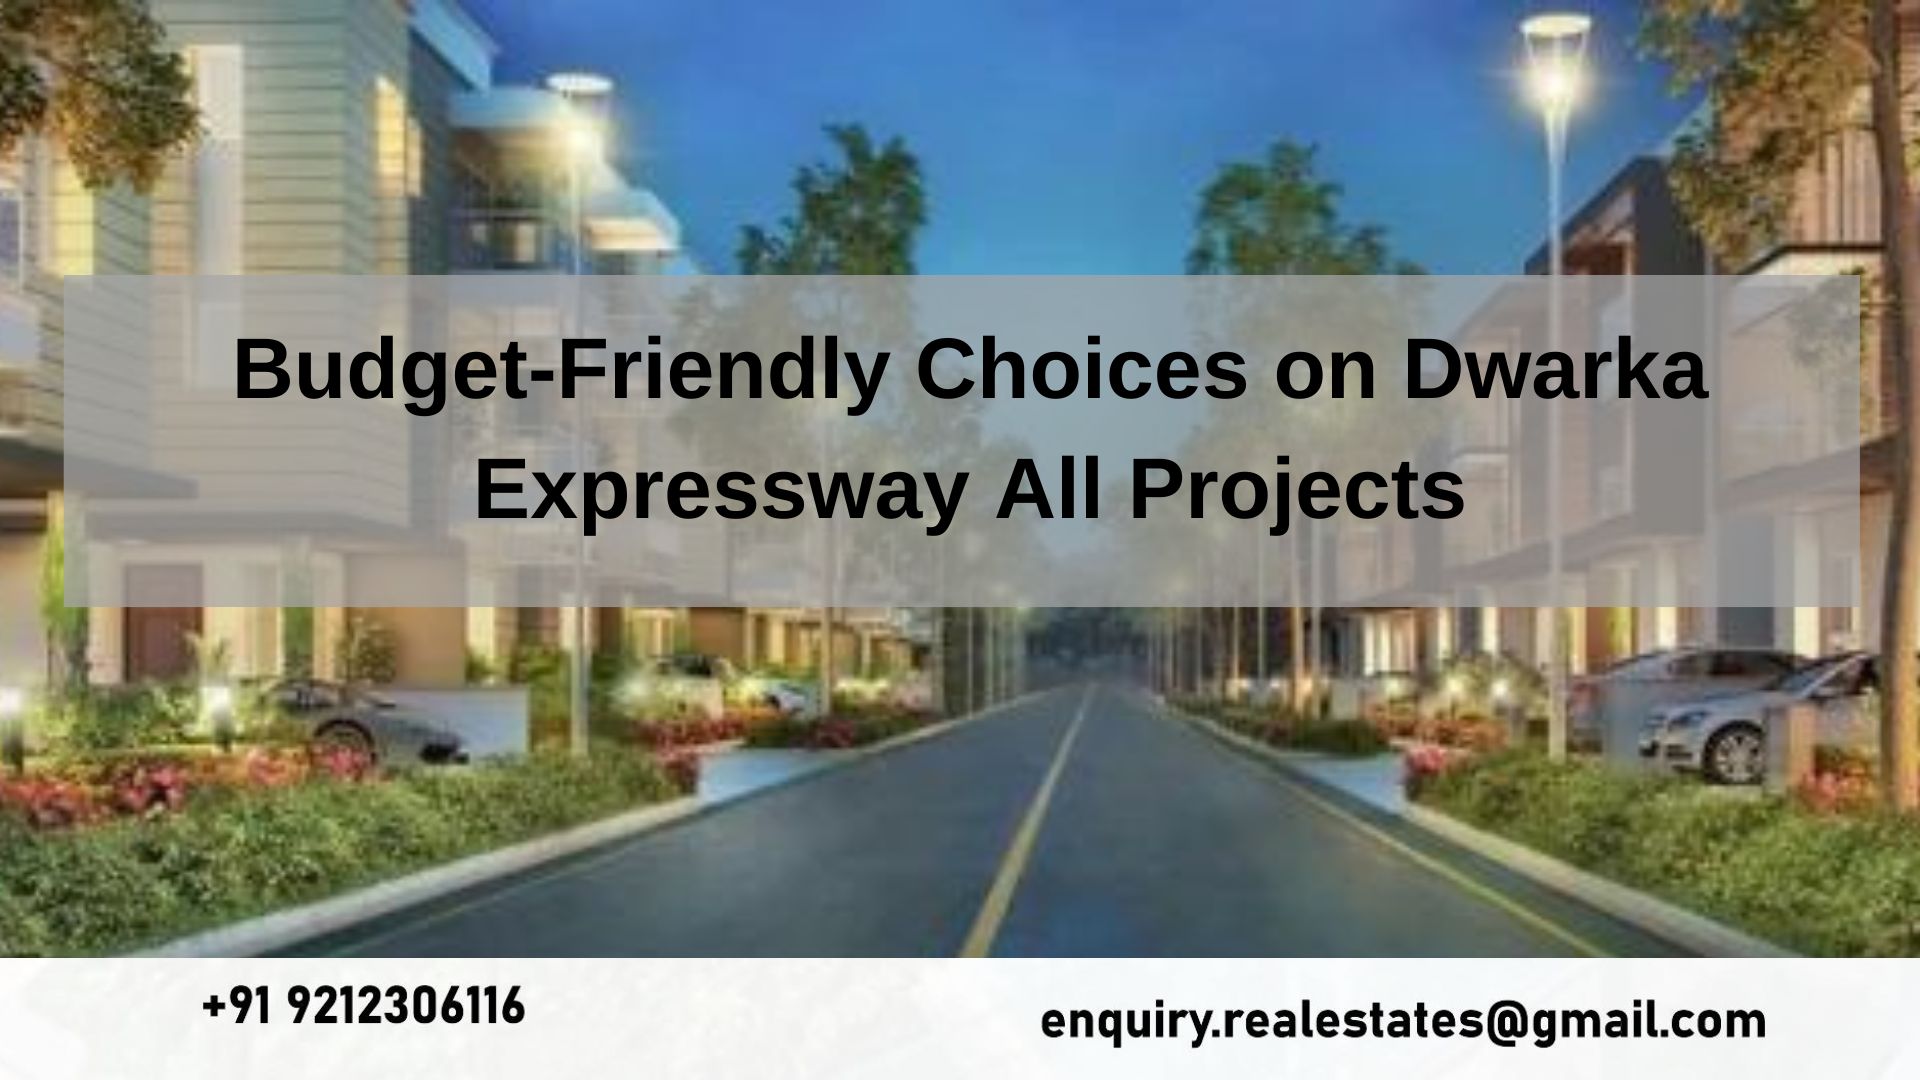 Budget-Friendly Choices on Dwarka Expressway All Projects